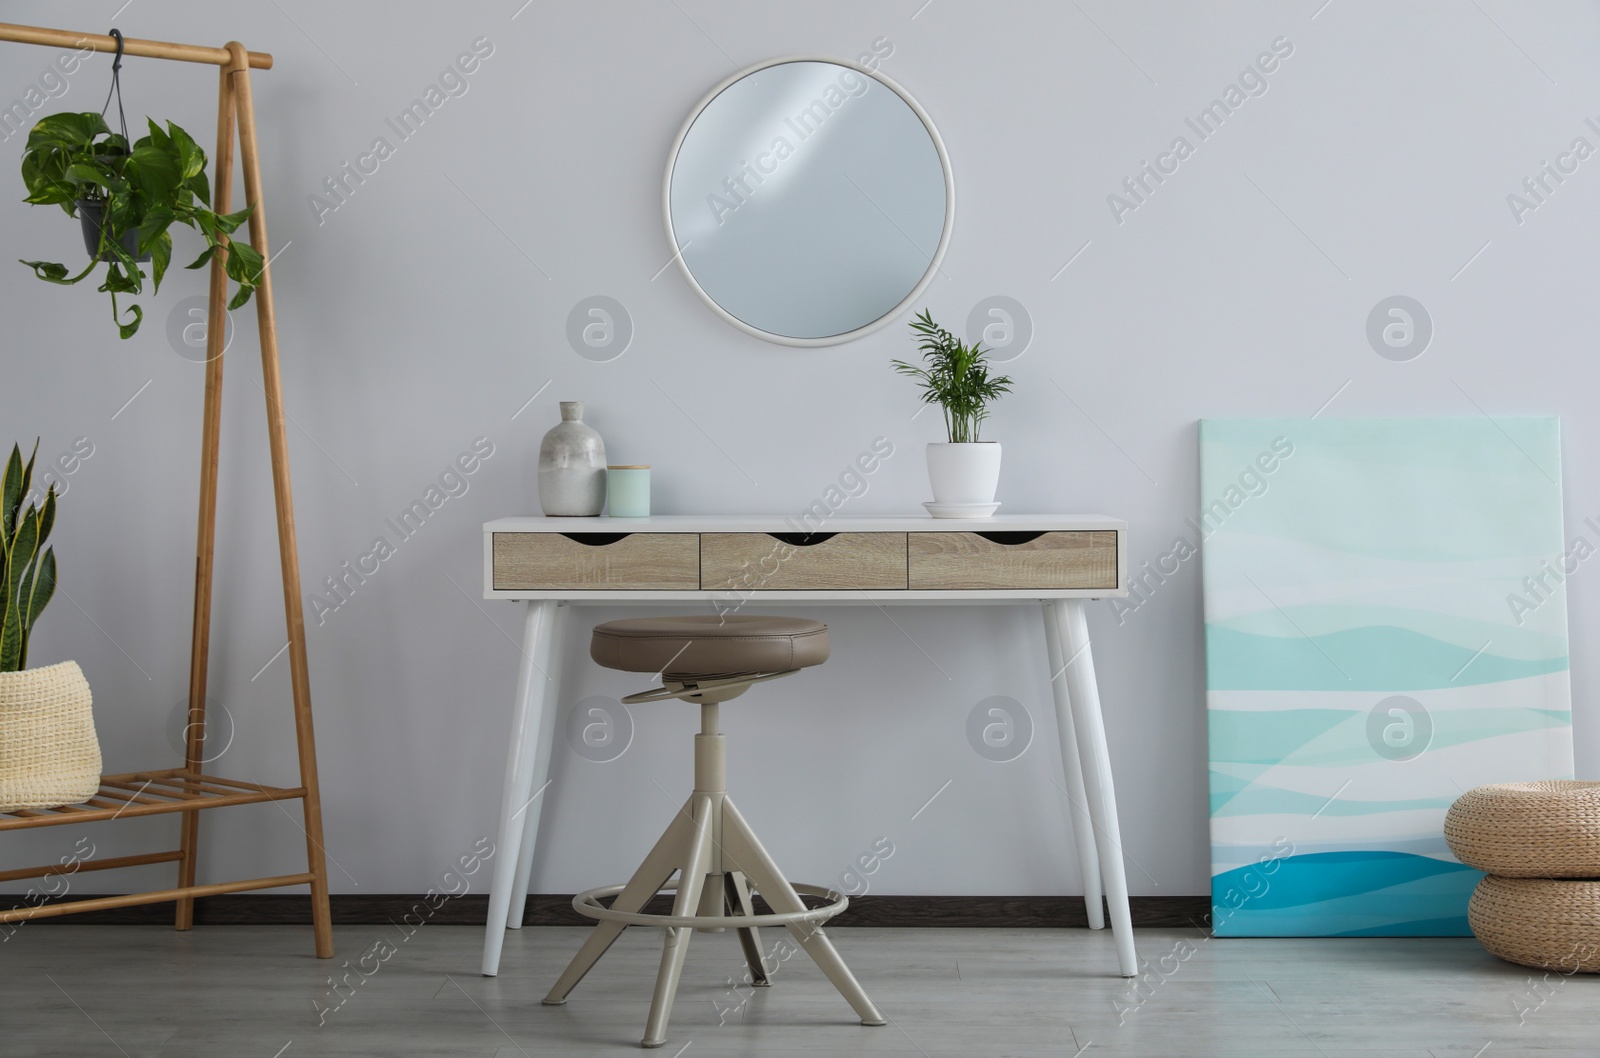 Photo of Stylish room interior with round mirror on wall over console table